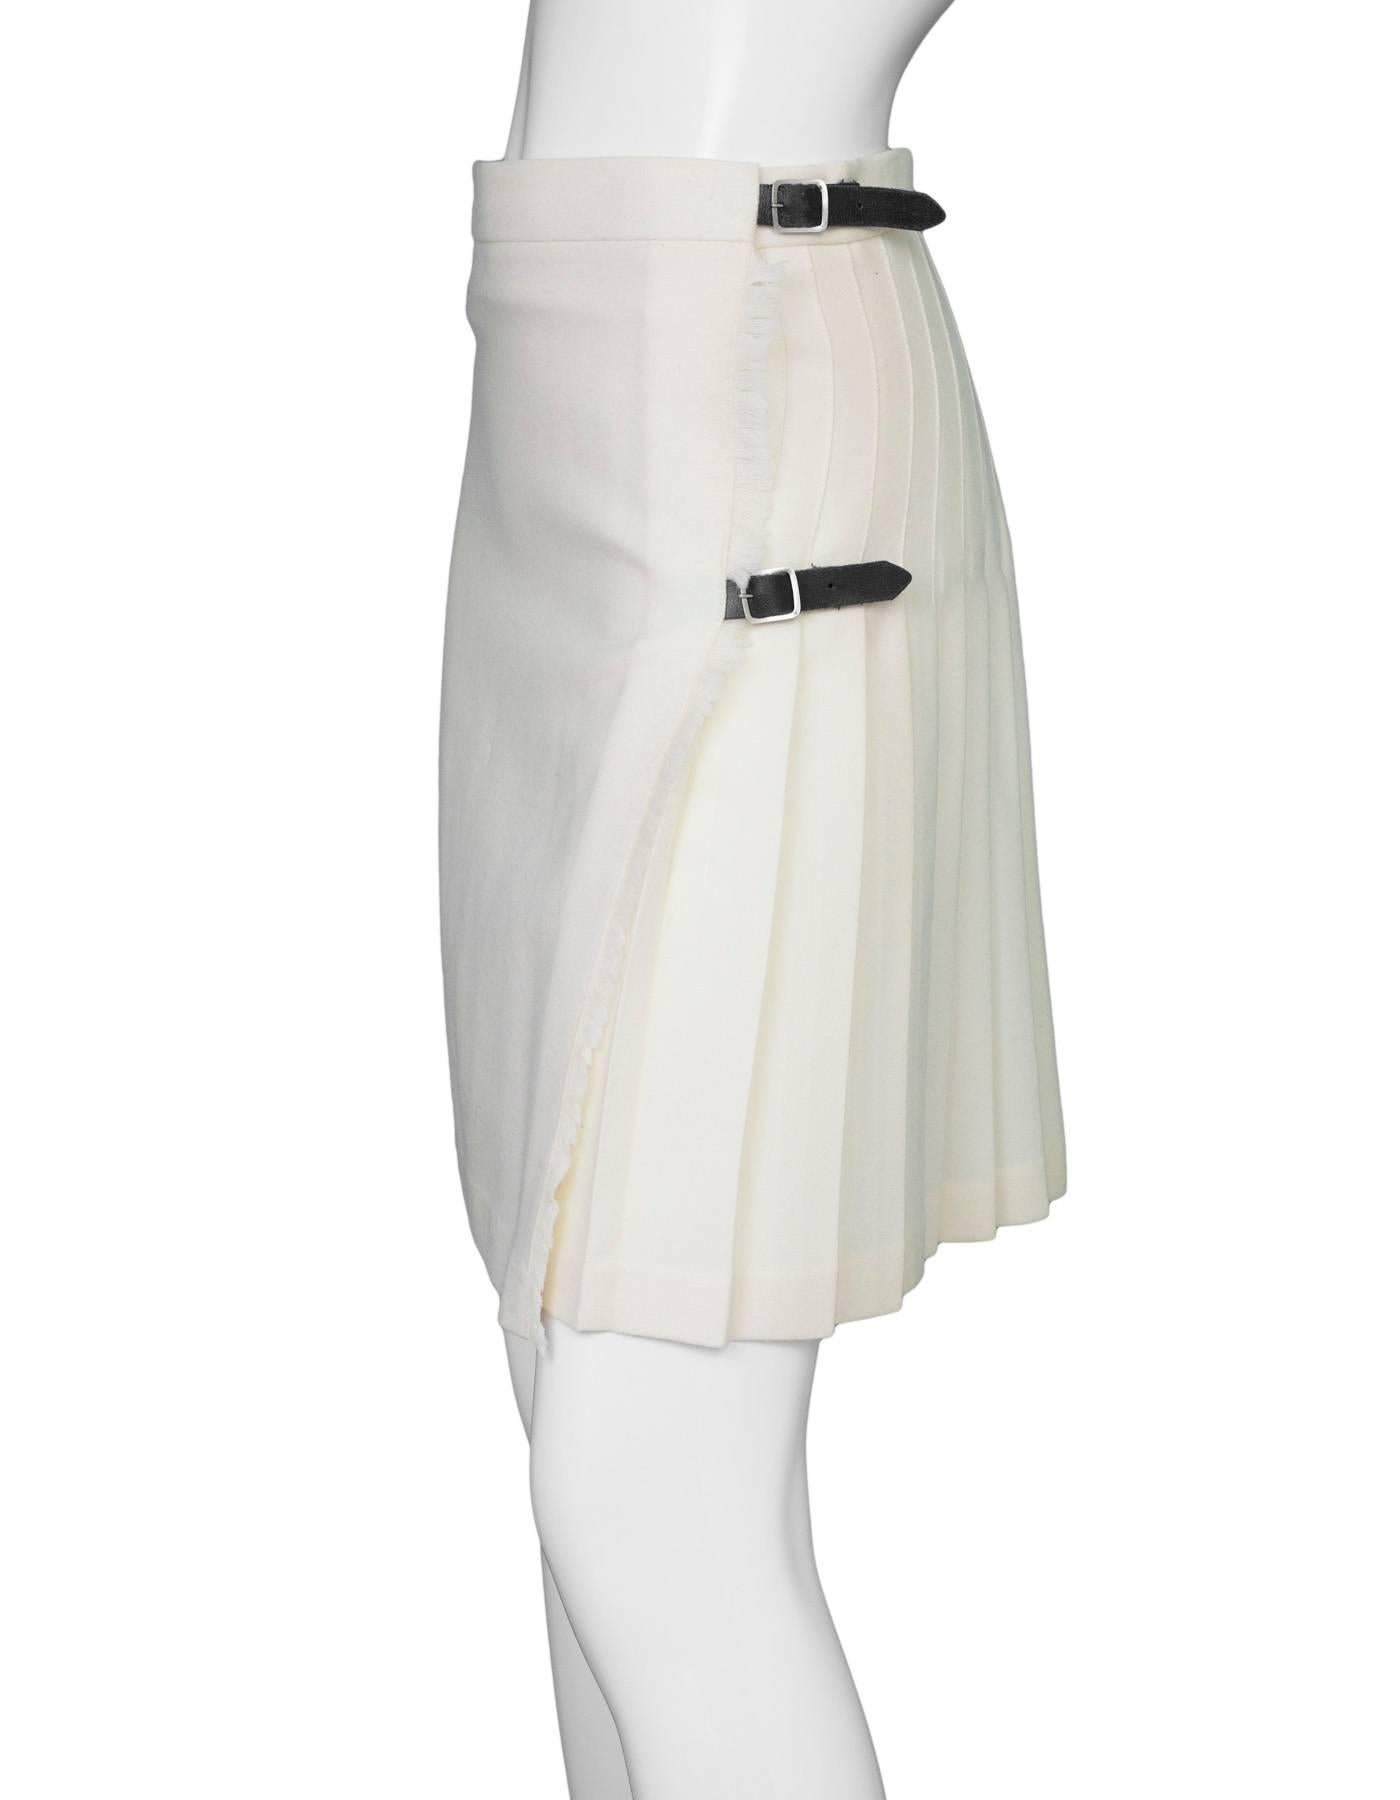 Burberry Ivory Wool Pleated Wrap Skirt 
Features black leather side buckles

Made In: Scotland
Color: Ivory and black
Composition: Not given- believed to be 100% wool
Lining: None
Closure/Opening: Wrap waist with inside button and exterior